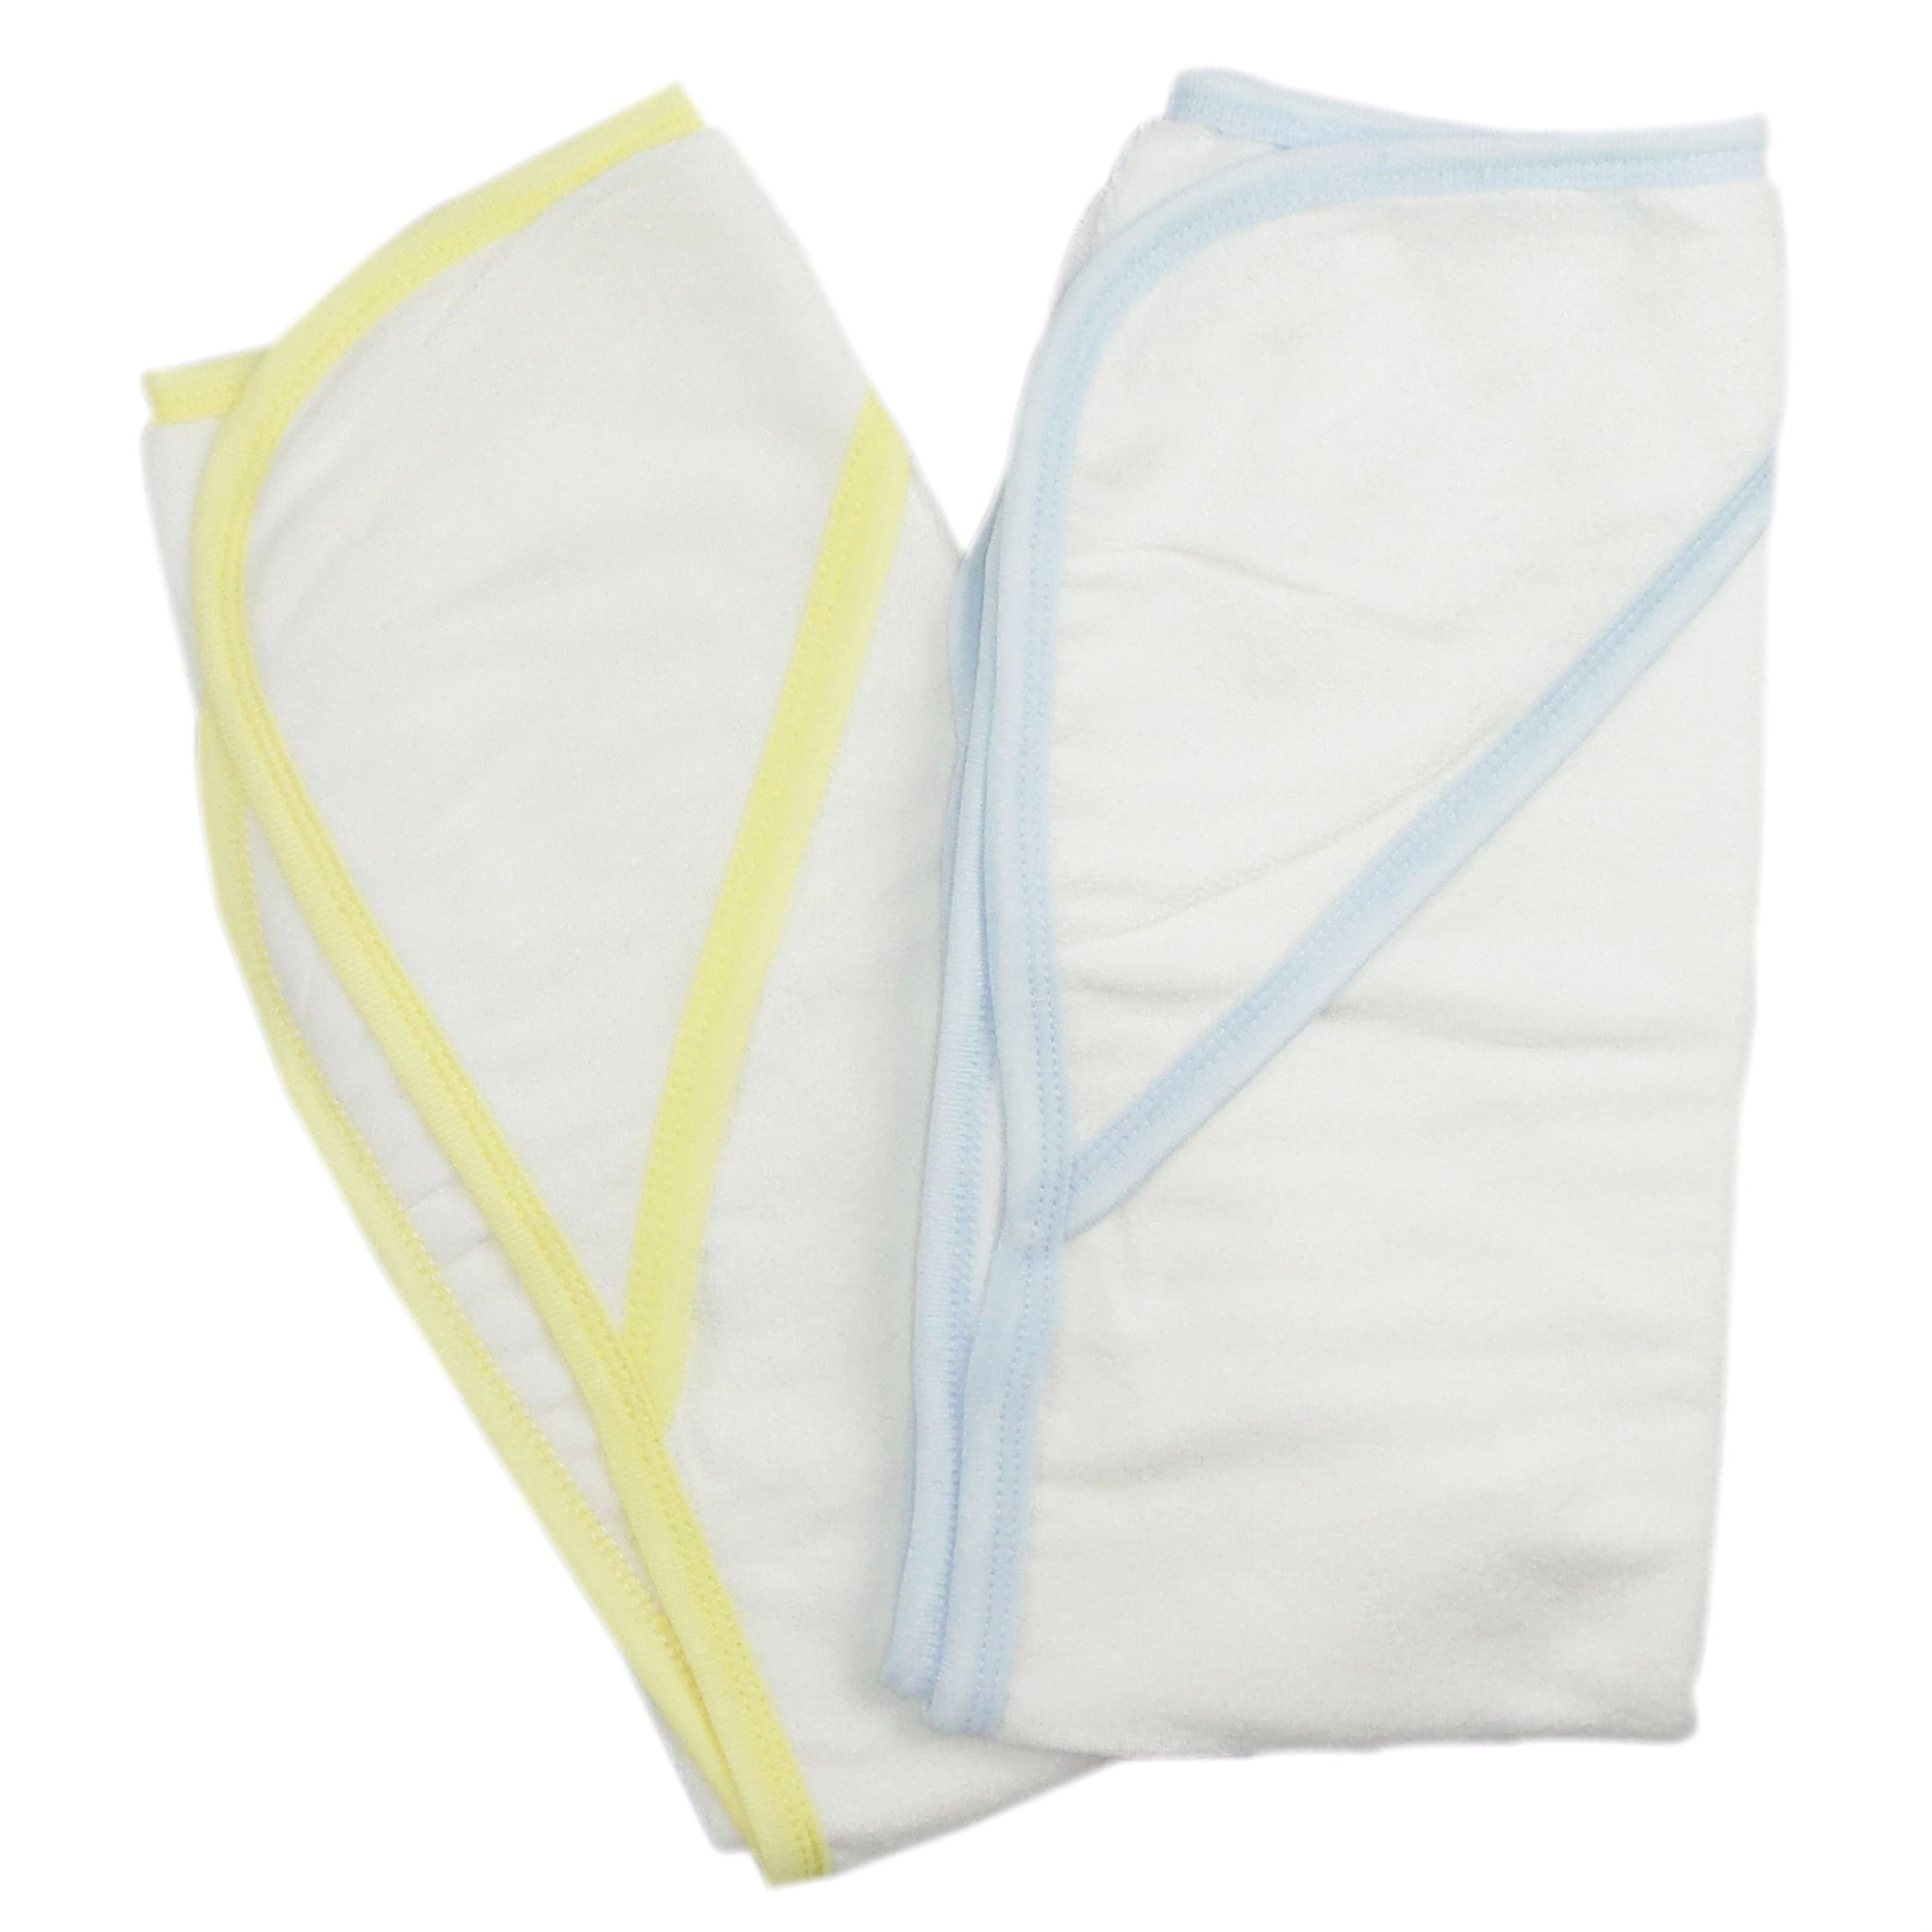 021-blue-021-yellow Infant Hooded Bath Towel, Blue - Pack Of 2